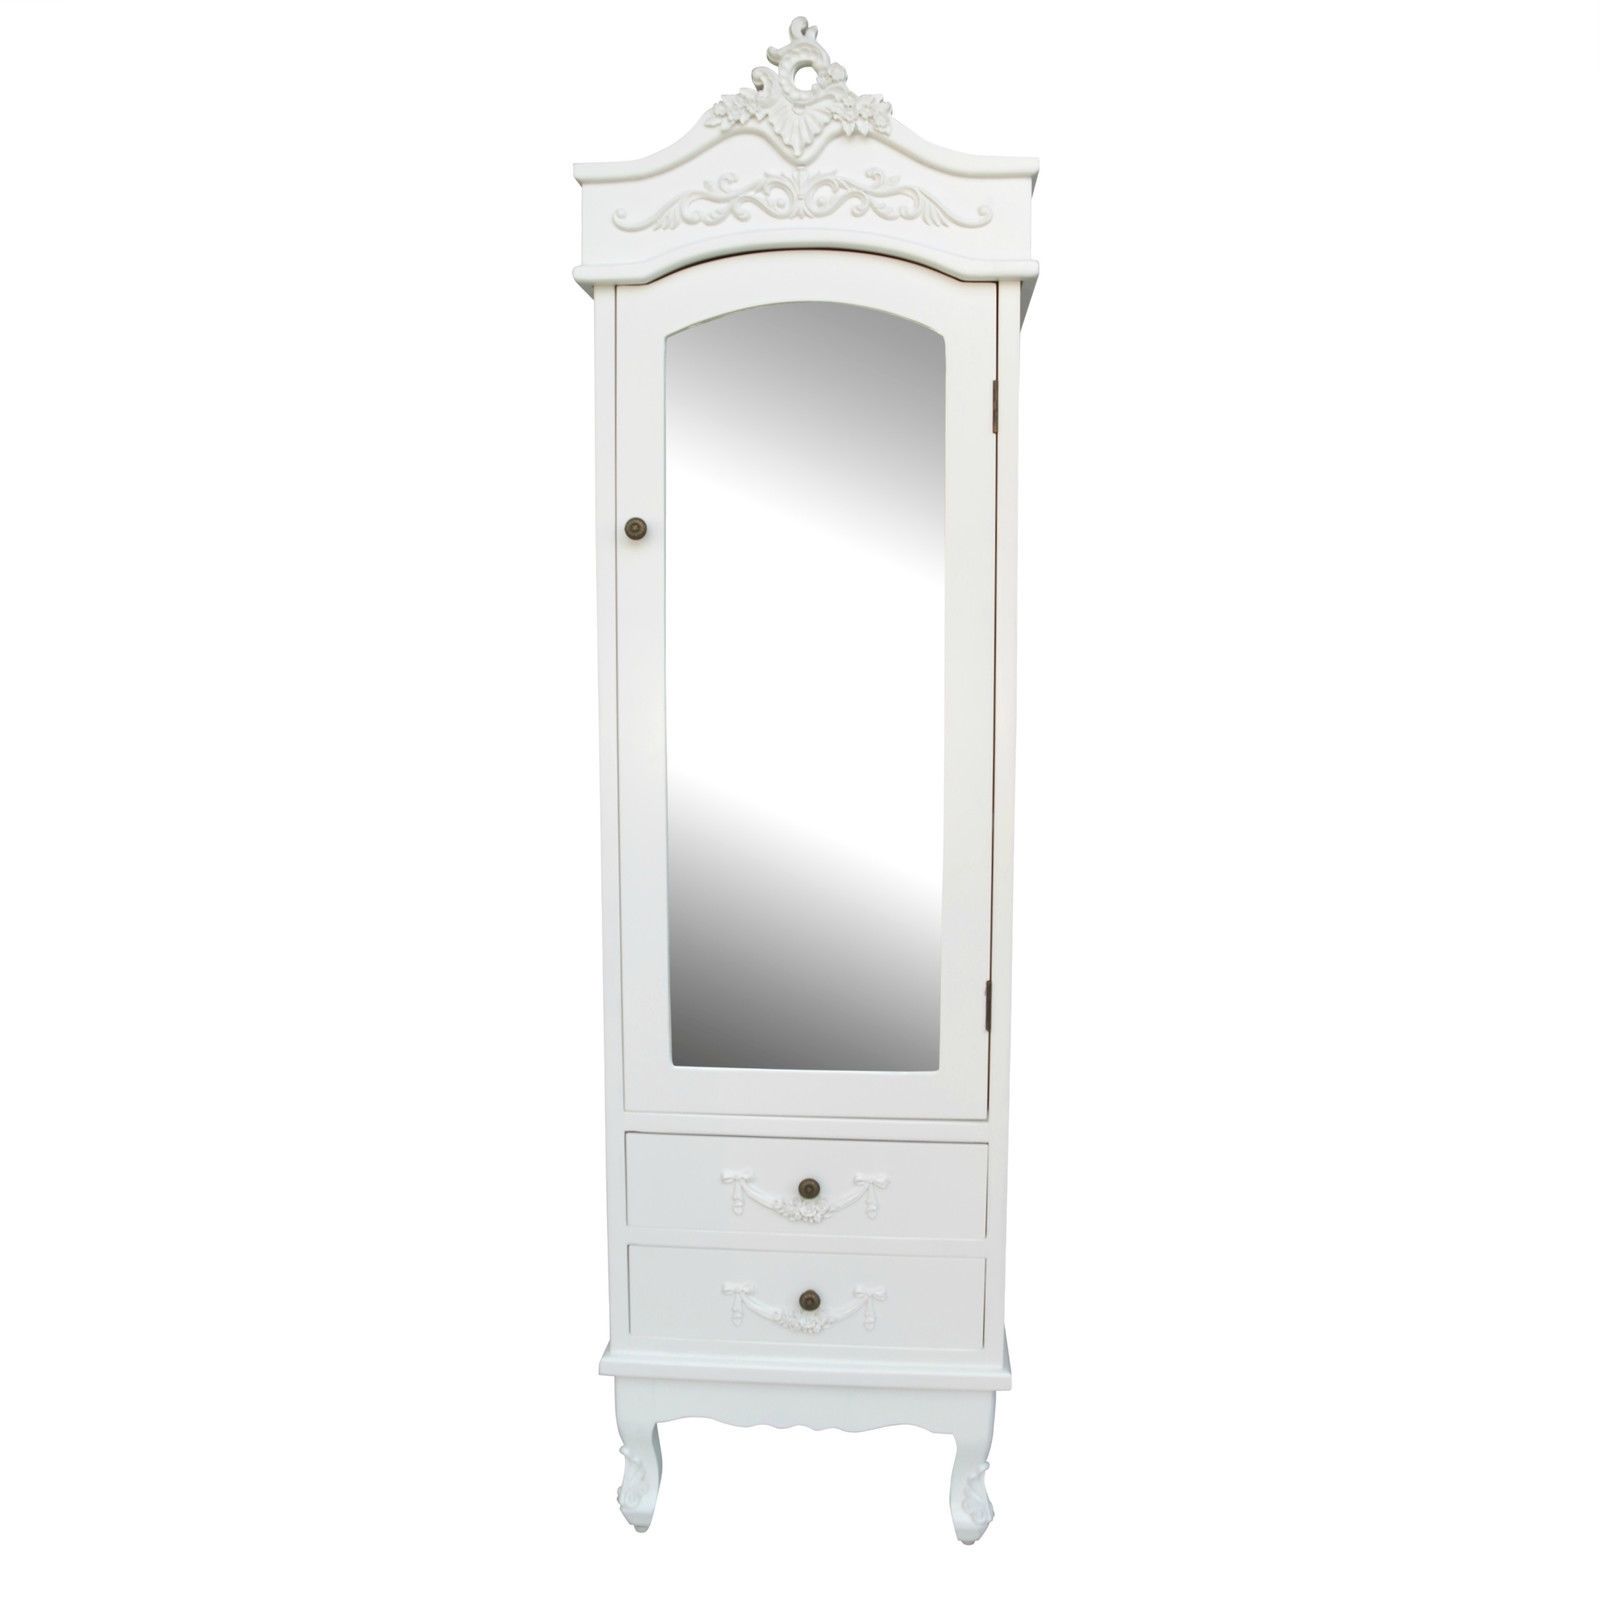 French White Single Door White Armoire Furniture – La Maison Chic Throughout Well Known Single French Wardrobes (View 4 of 15)